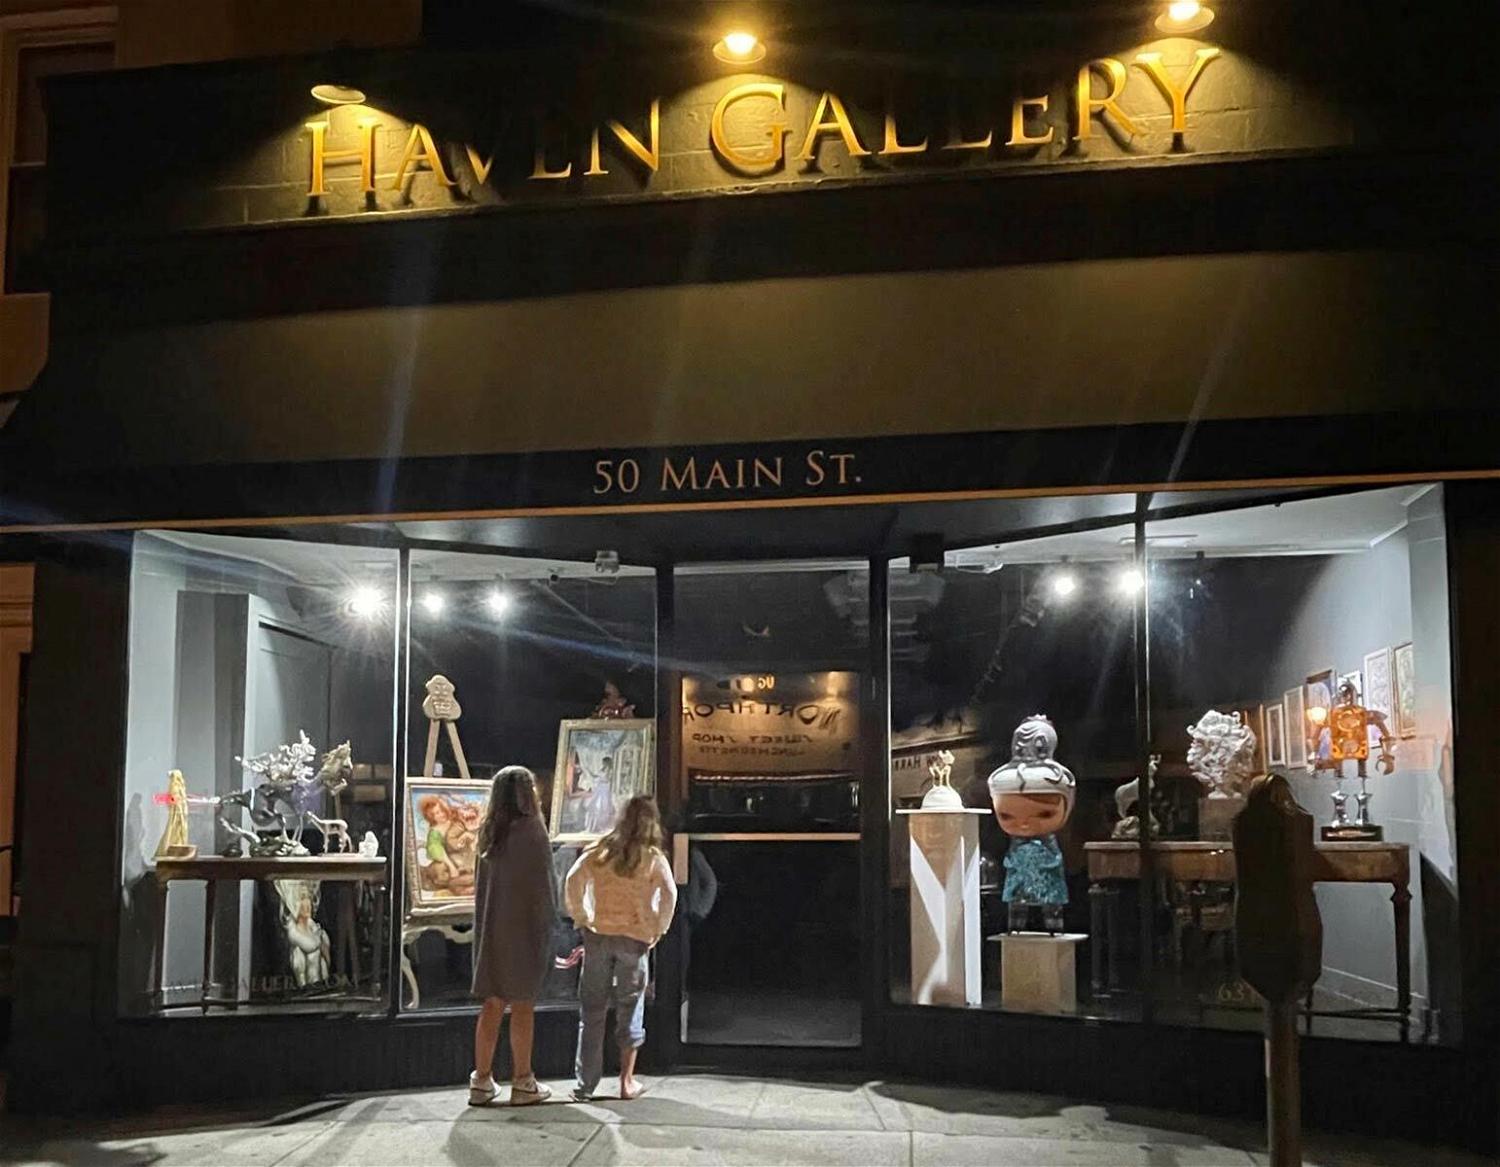 Haven Gallery began operating permanently out of 50 Main Street. Photo courtesy of Haven Gallery.